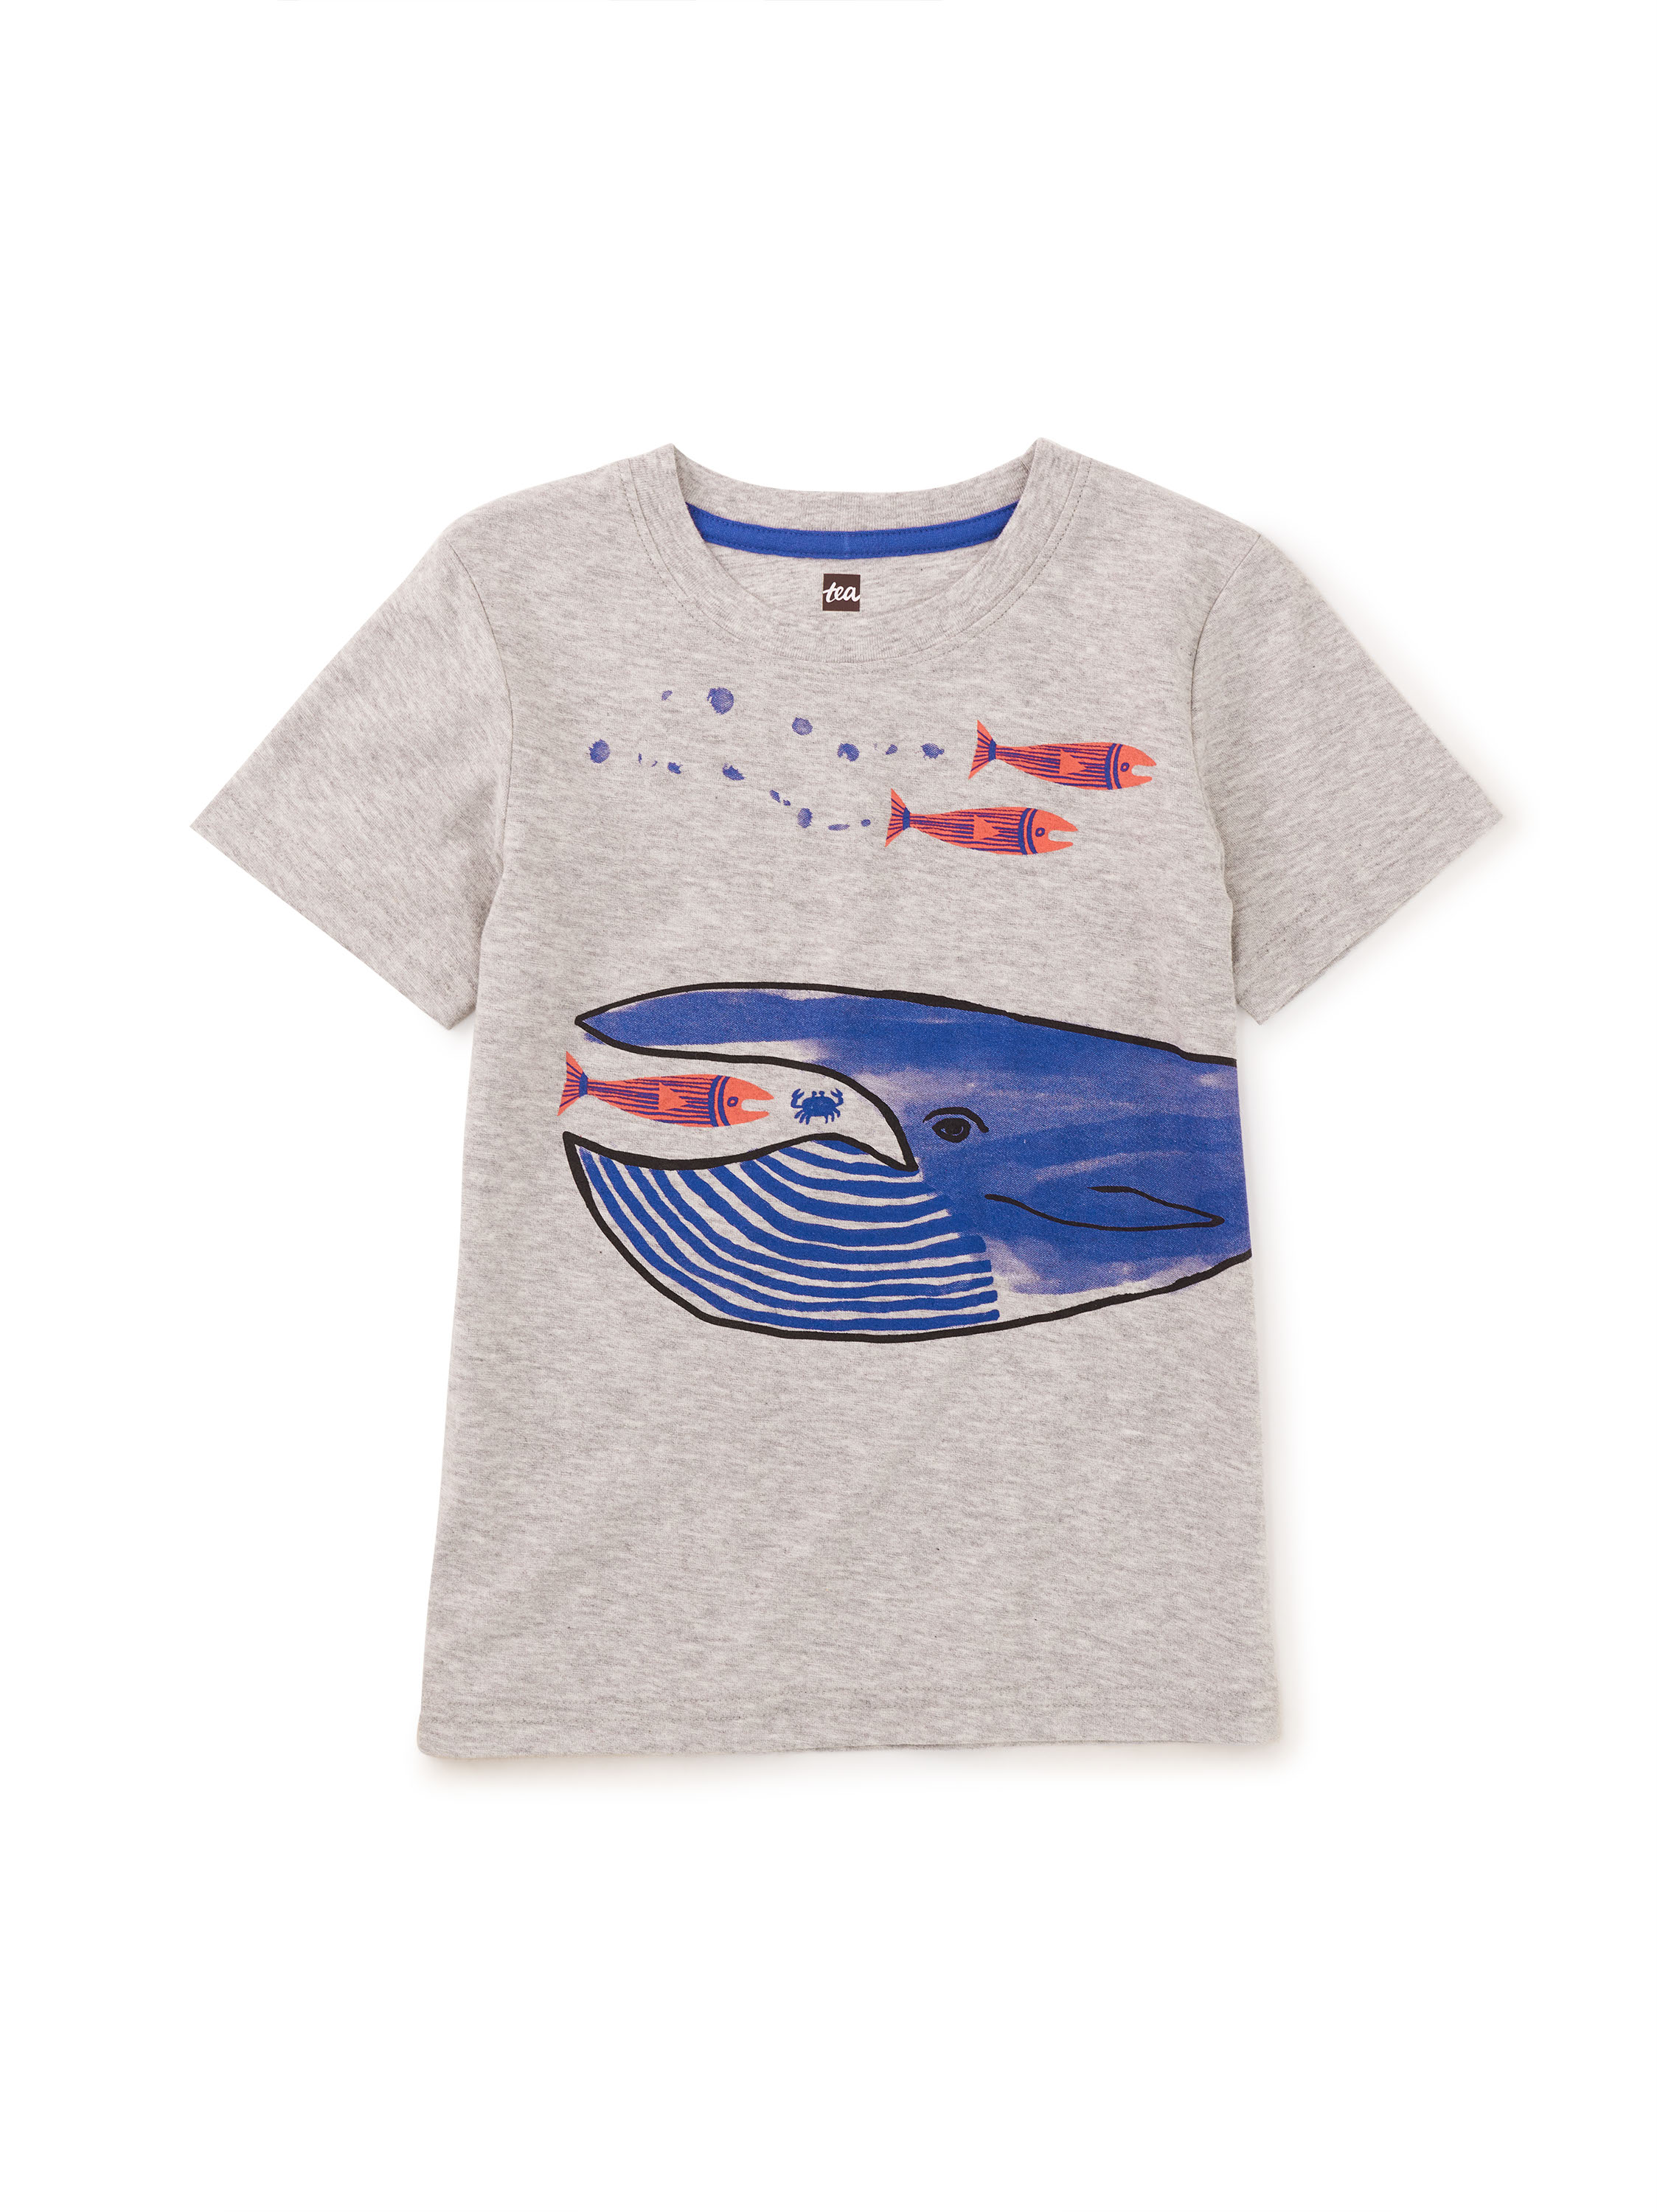 Whale of a Time Graphic Tee | Tea Collection